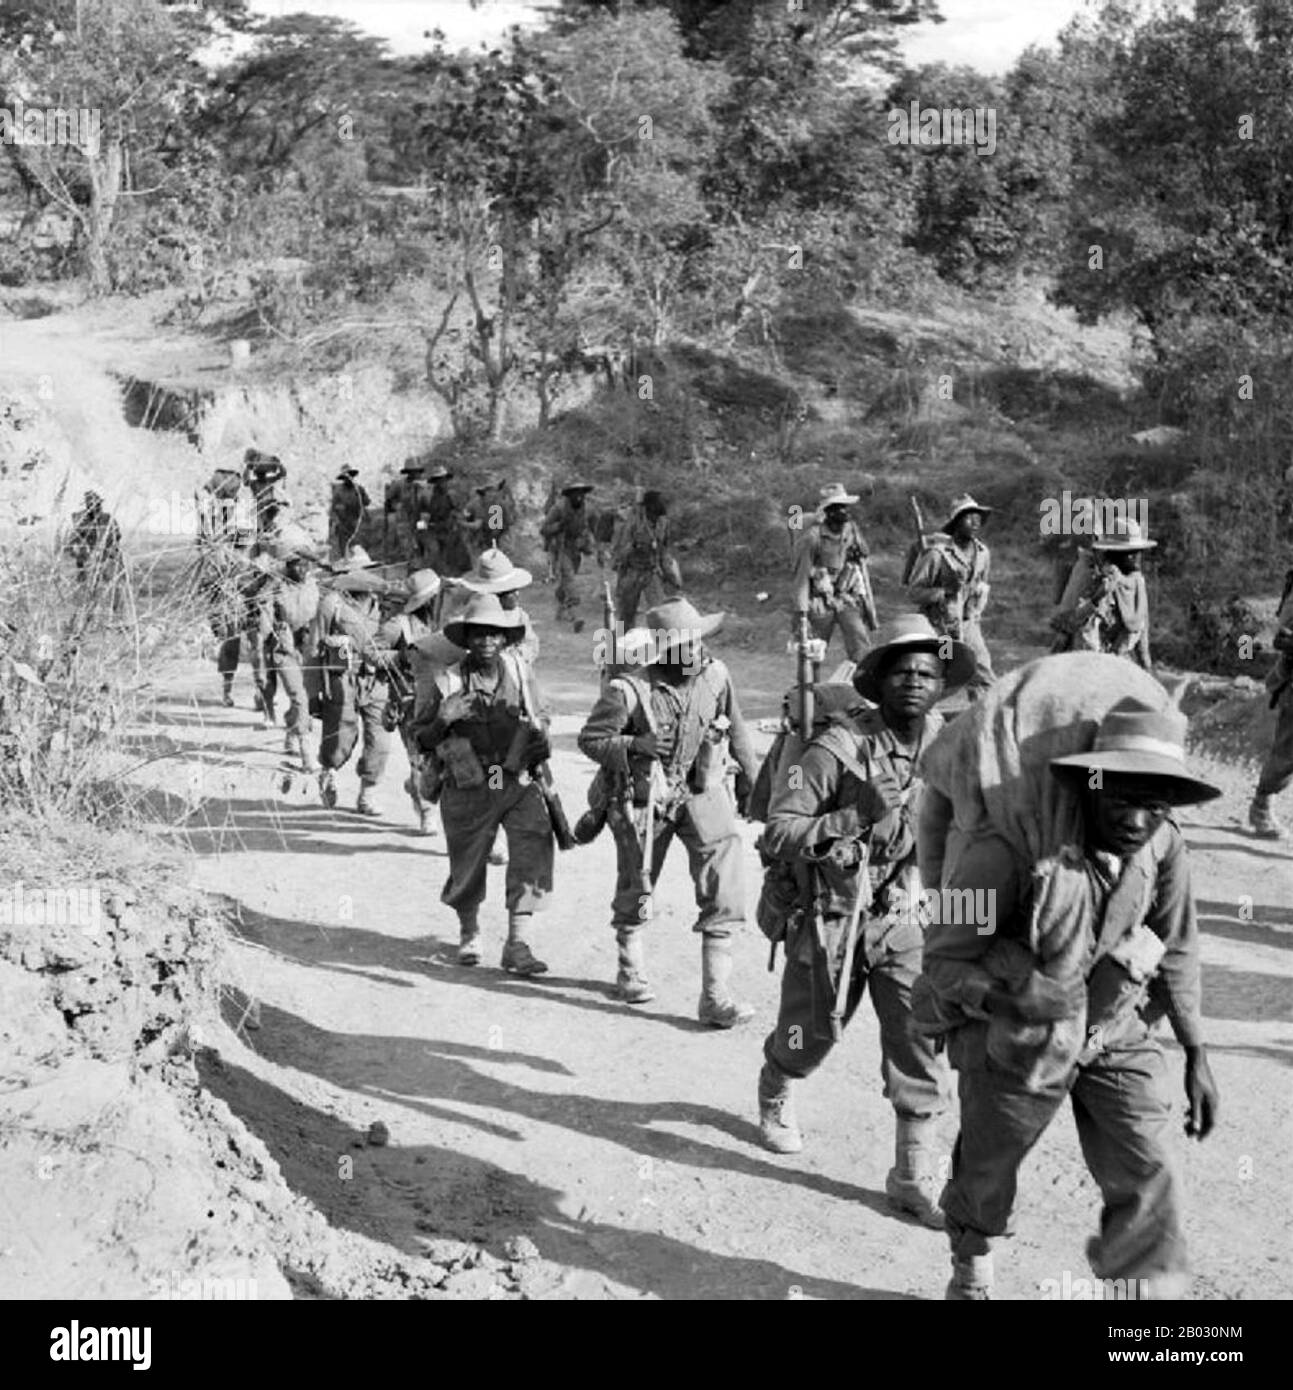 The 11th East Africa Infantry Division was composed of soldiers from the modern-day nations of Kenya, Uganda, Malawi, Tanzania and Zimbabwe. The division fought with the British Fourteenth Army in Burma (Myanmar) during the Burma Campaign.  In the later part of 1944, the division pursued the Japanese retreating from Imphal in Northeast India down the Kabaw Valley in Burma and established bridgeheads over the Chindwin River. Stock Photo